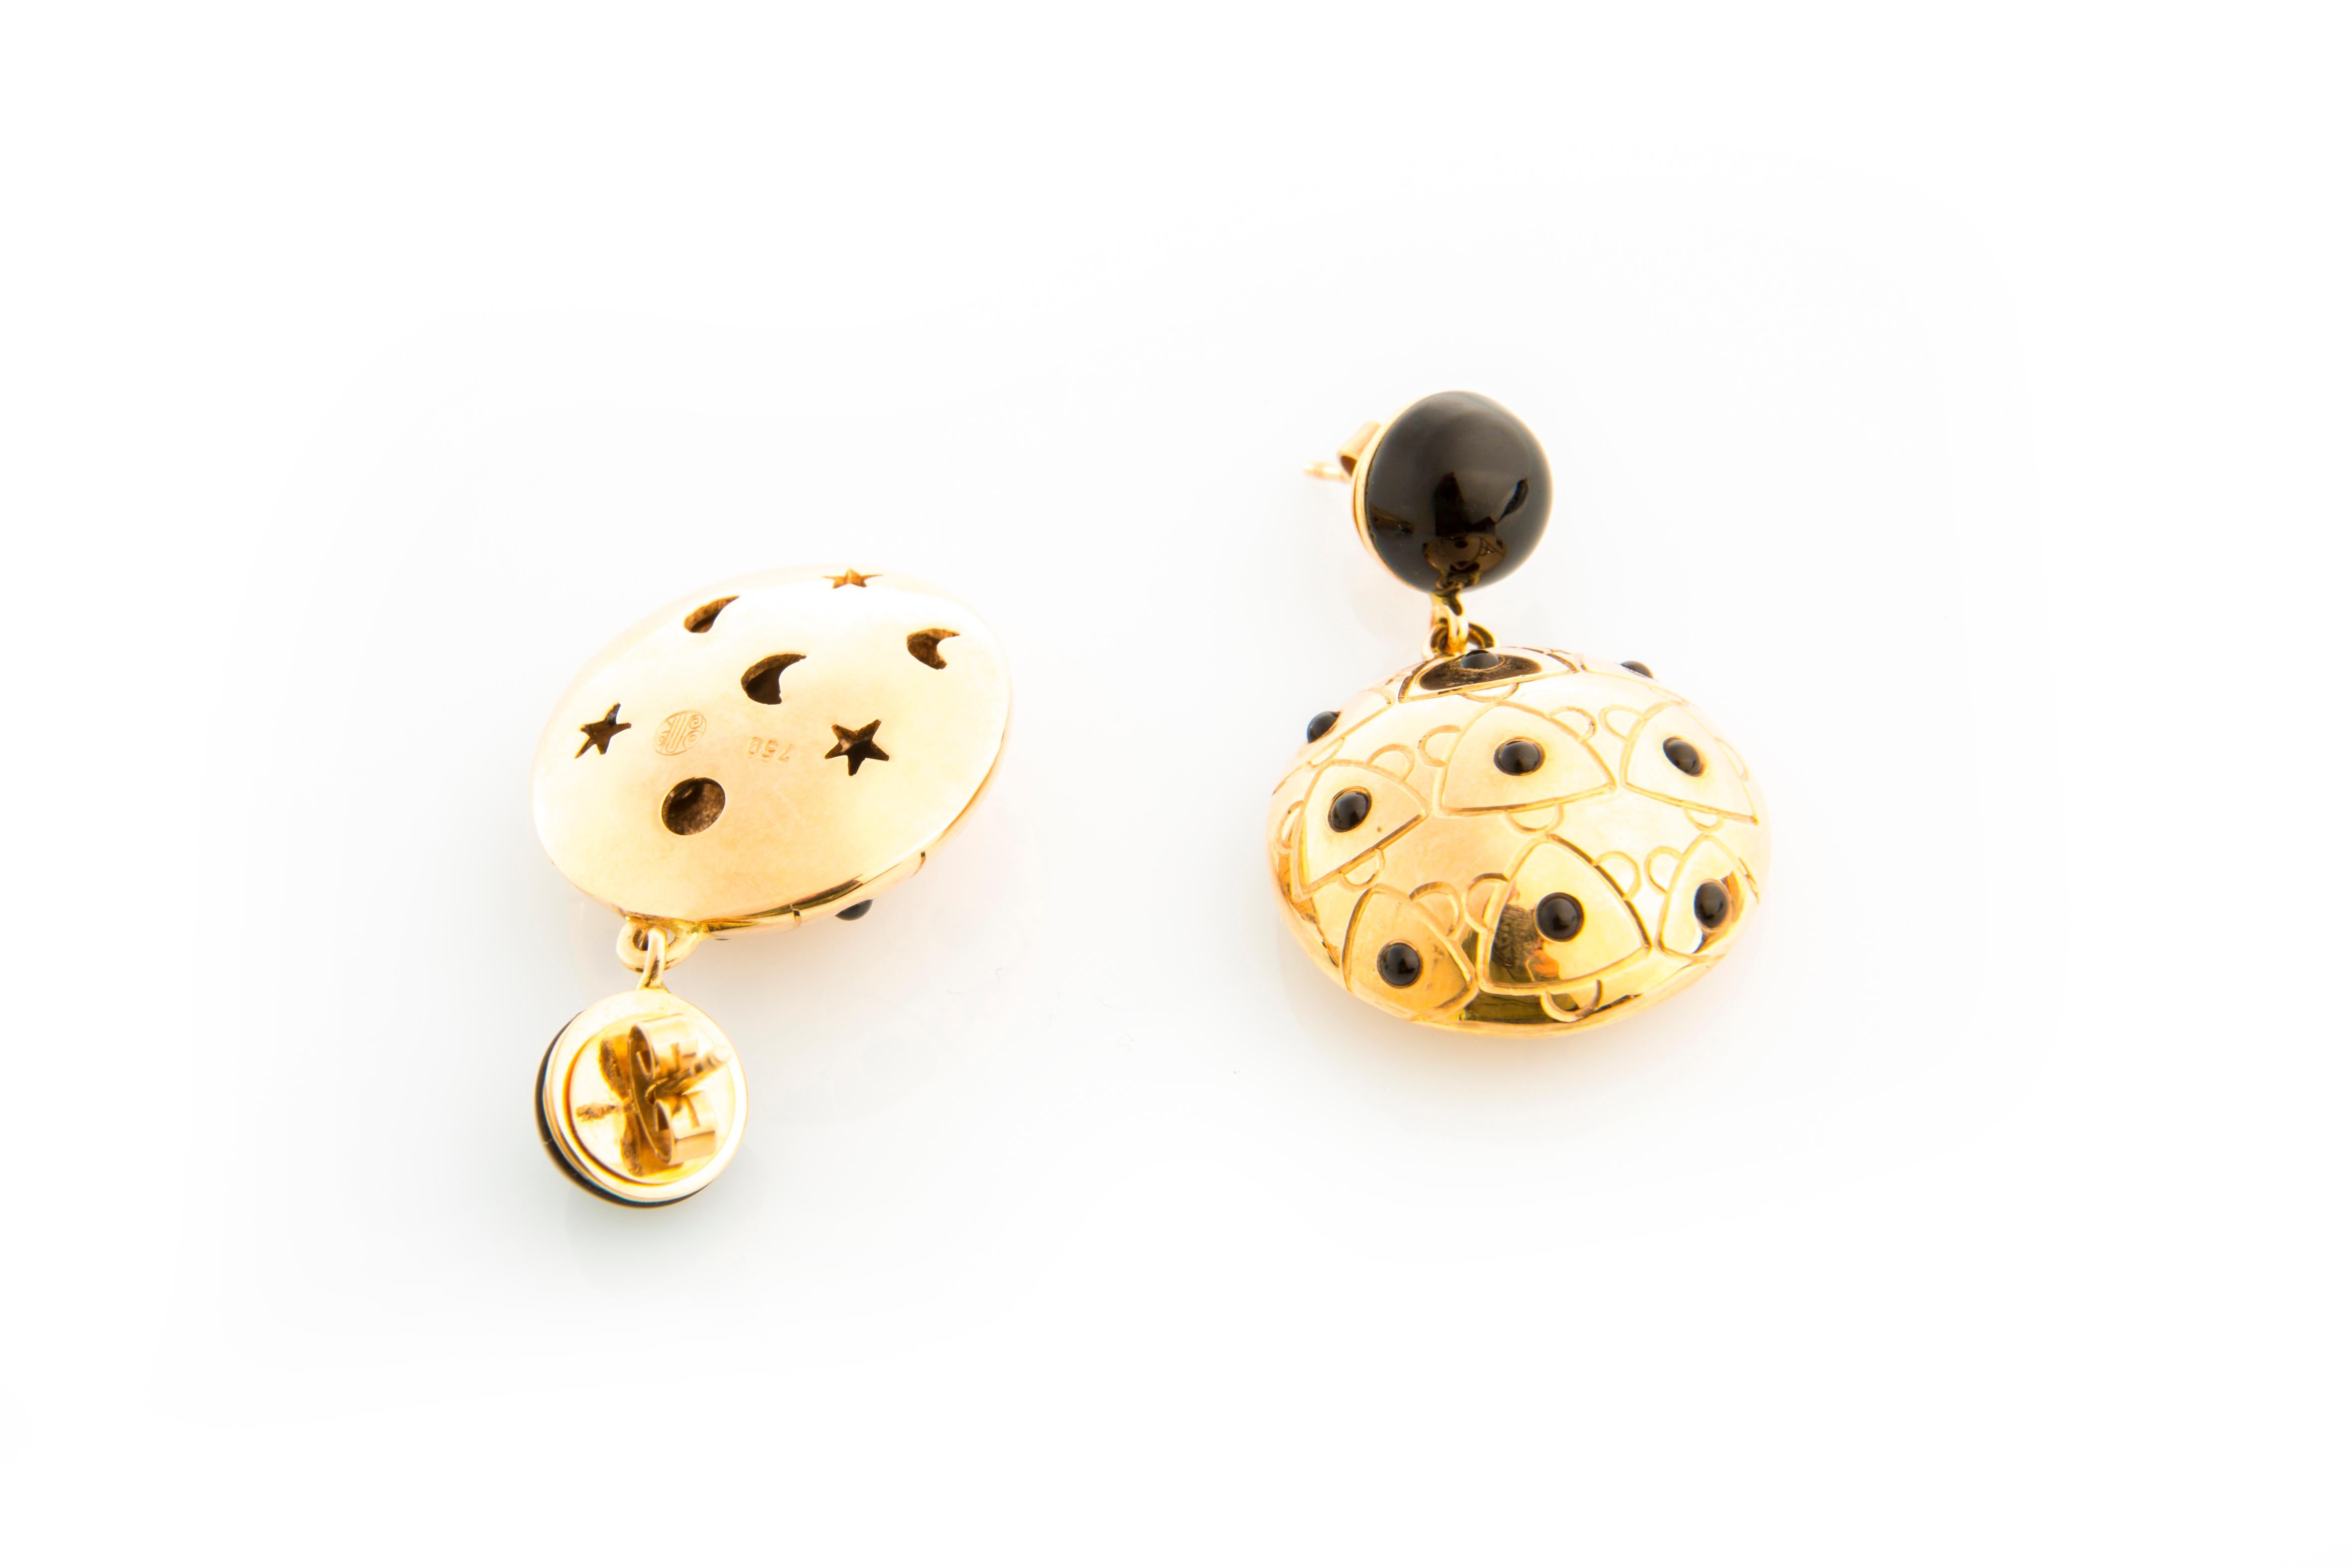 Women's Sea Urchin Earrings with Onyx and Gold 18 Karat For Sale